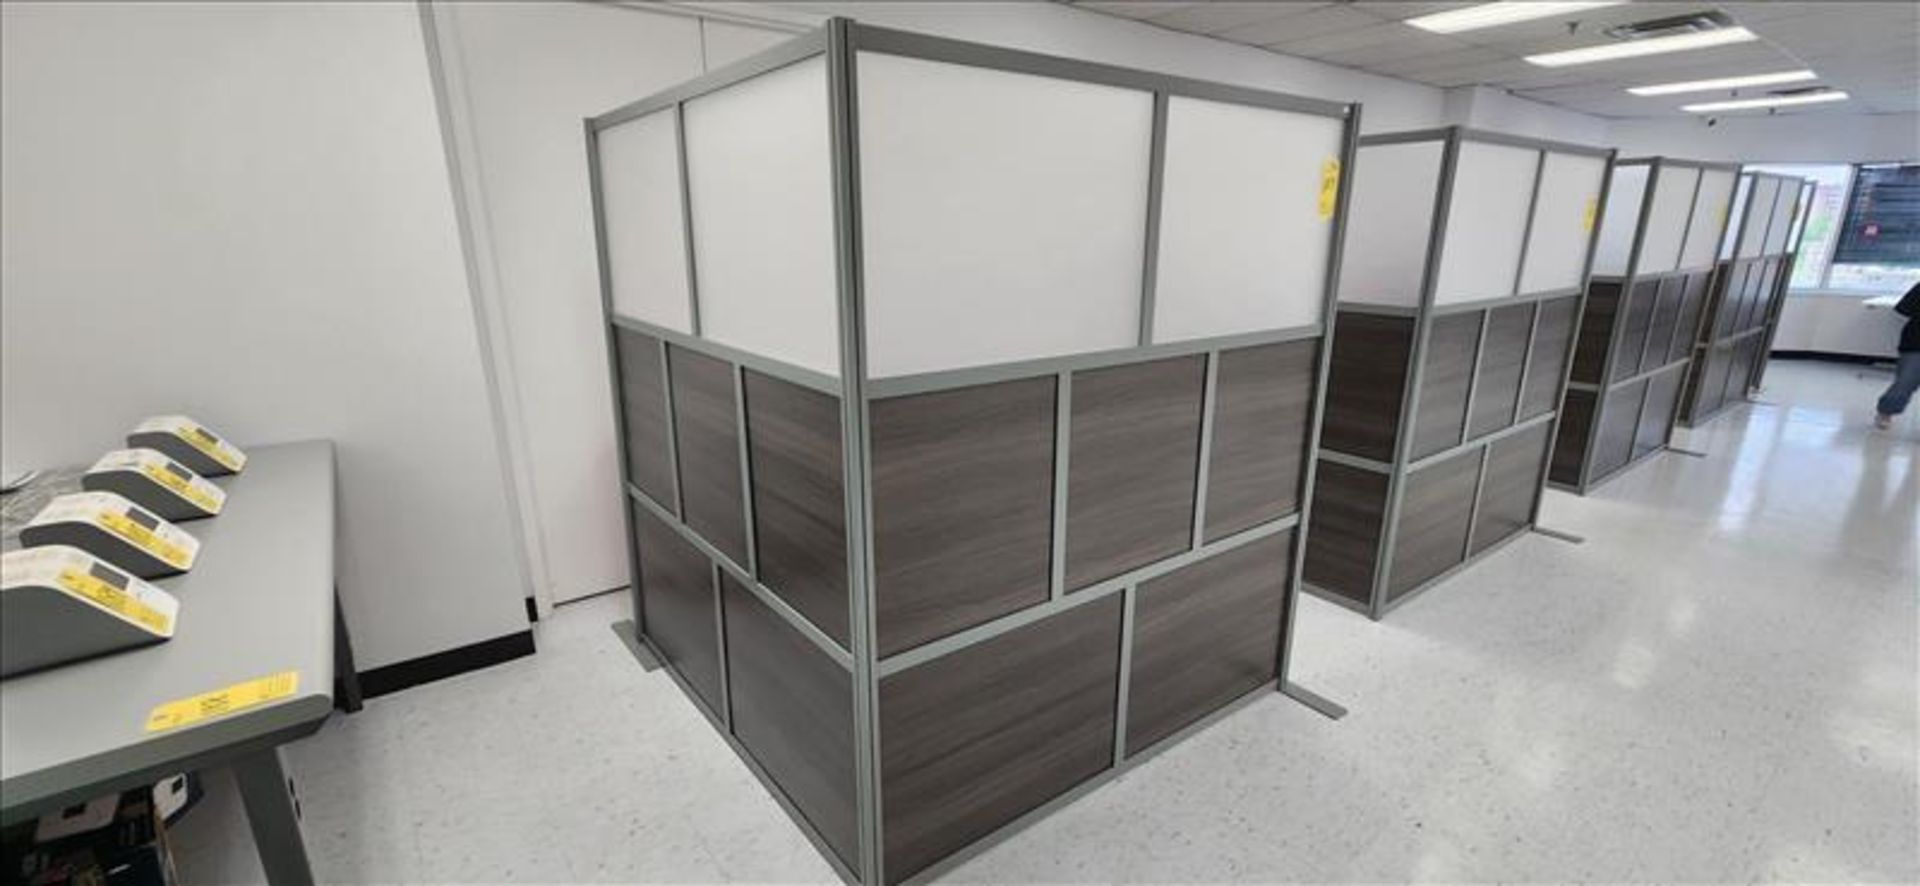 (4) 2-Sided Partition approx. 67 in. x 76 in. ea.